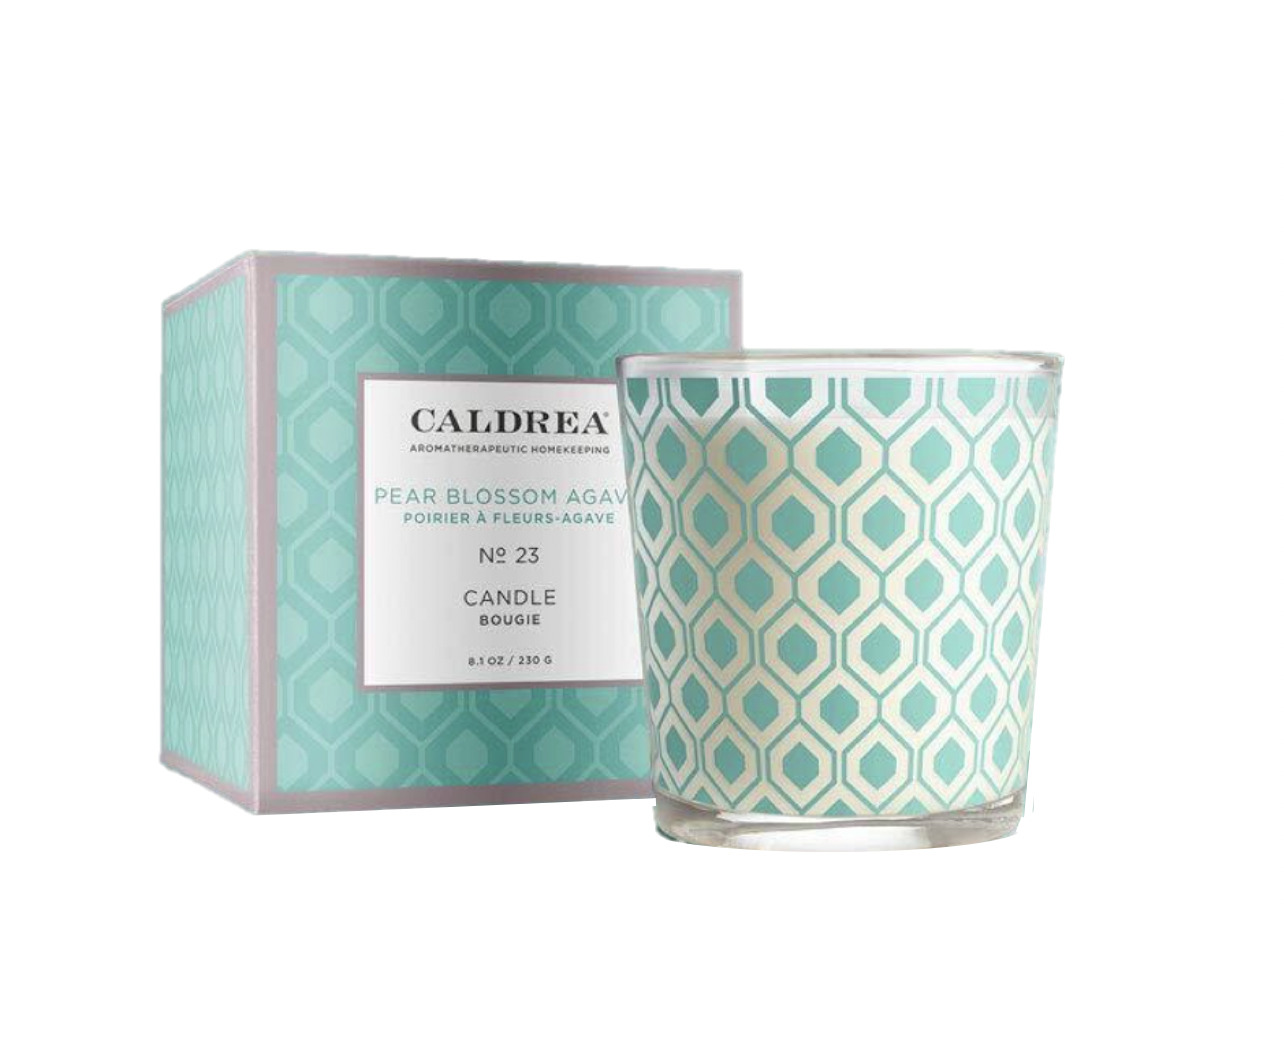 Caldrea Scented CAndle Made With Essential Oils - Pear Blossom Agave No.23